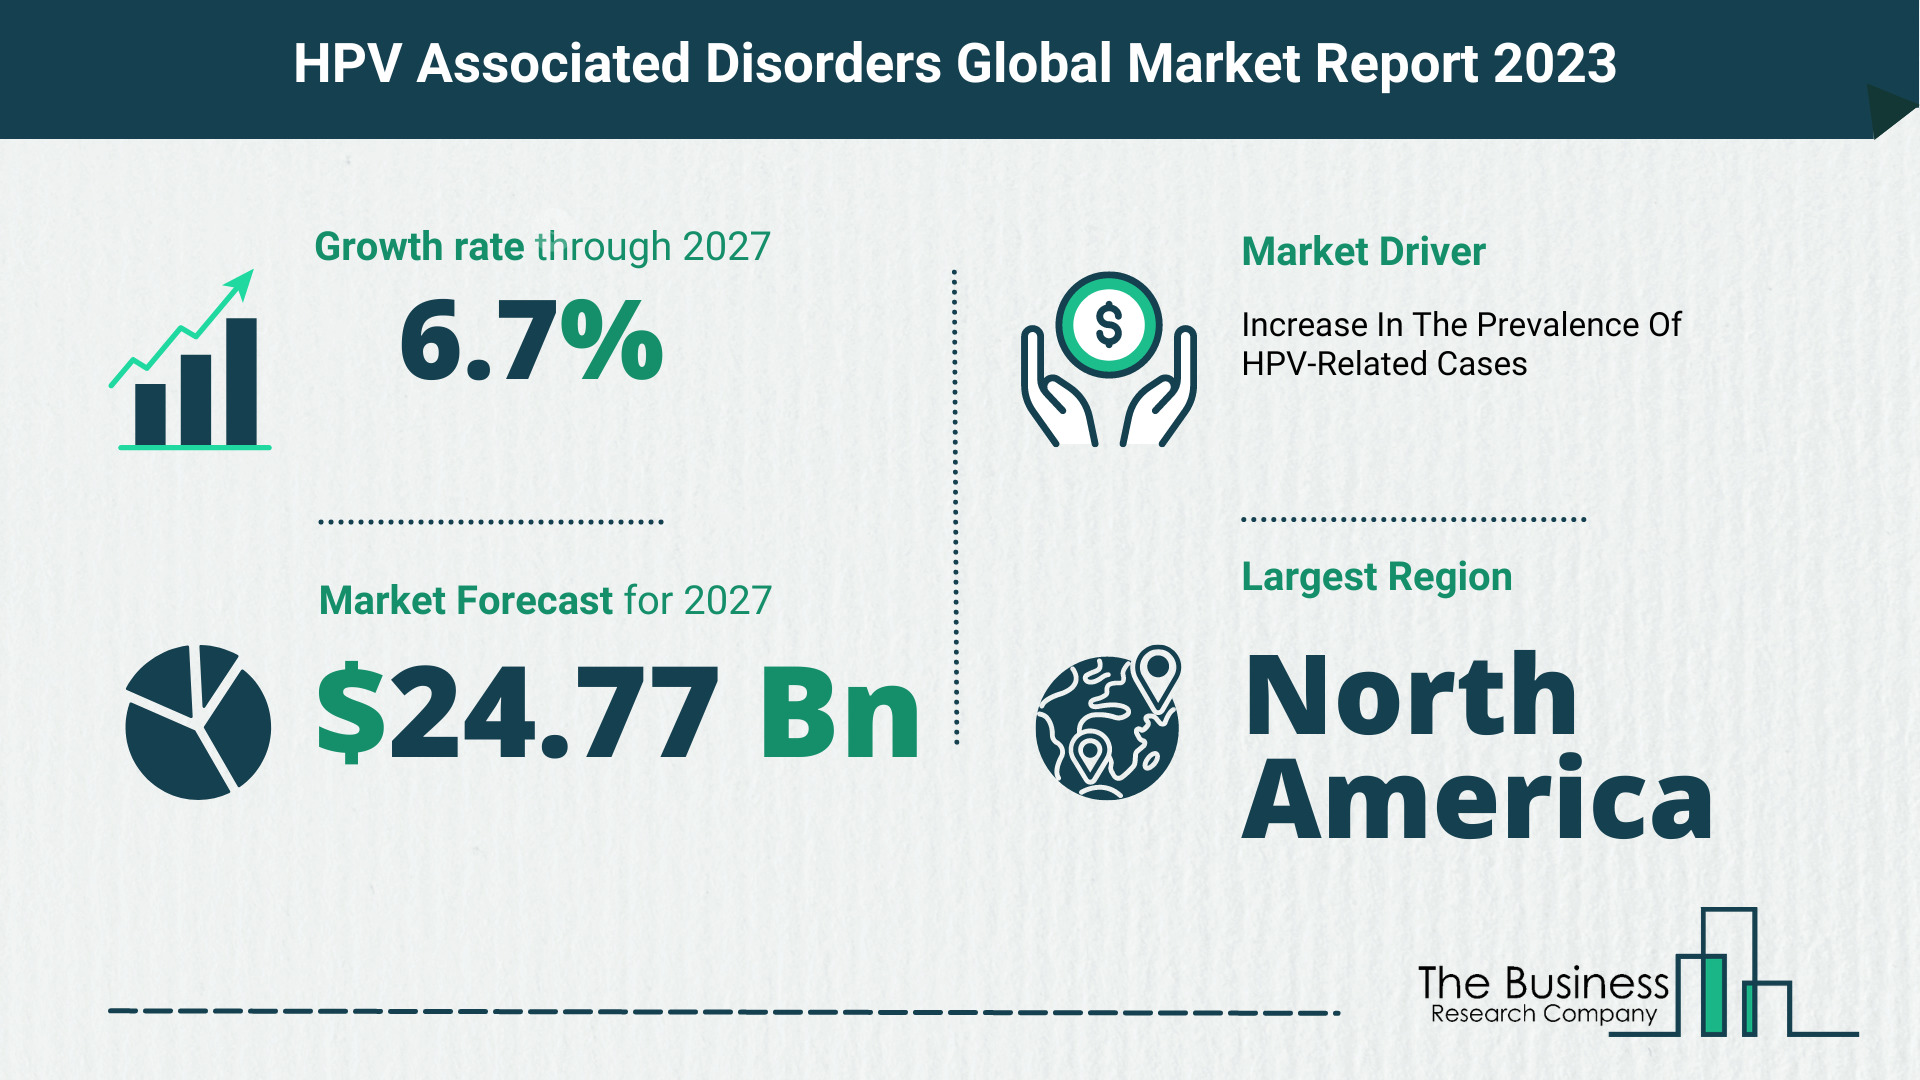 HPV Associated Disorders Market Size, Share, And Growth Rate Analysis 2023